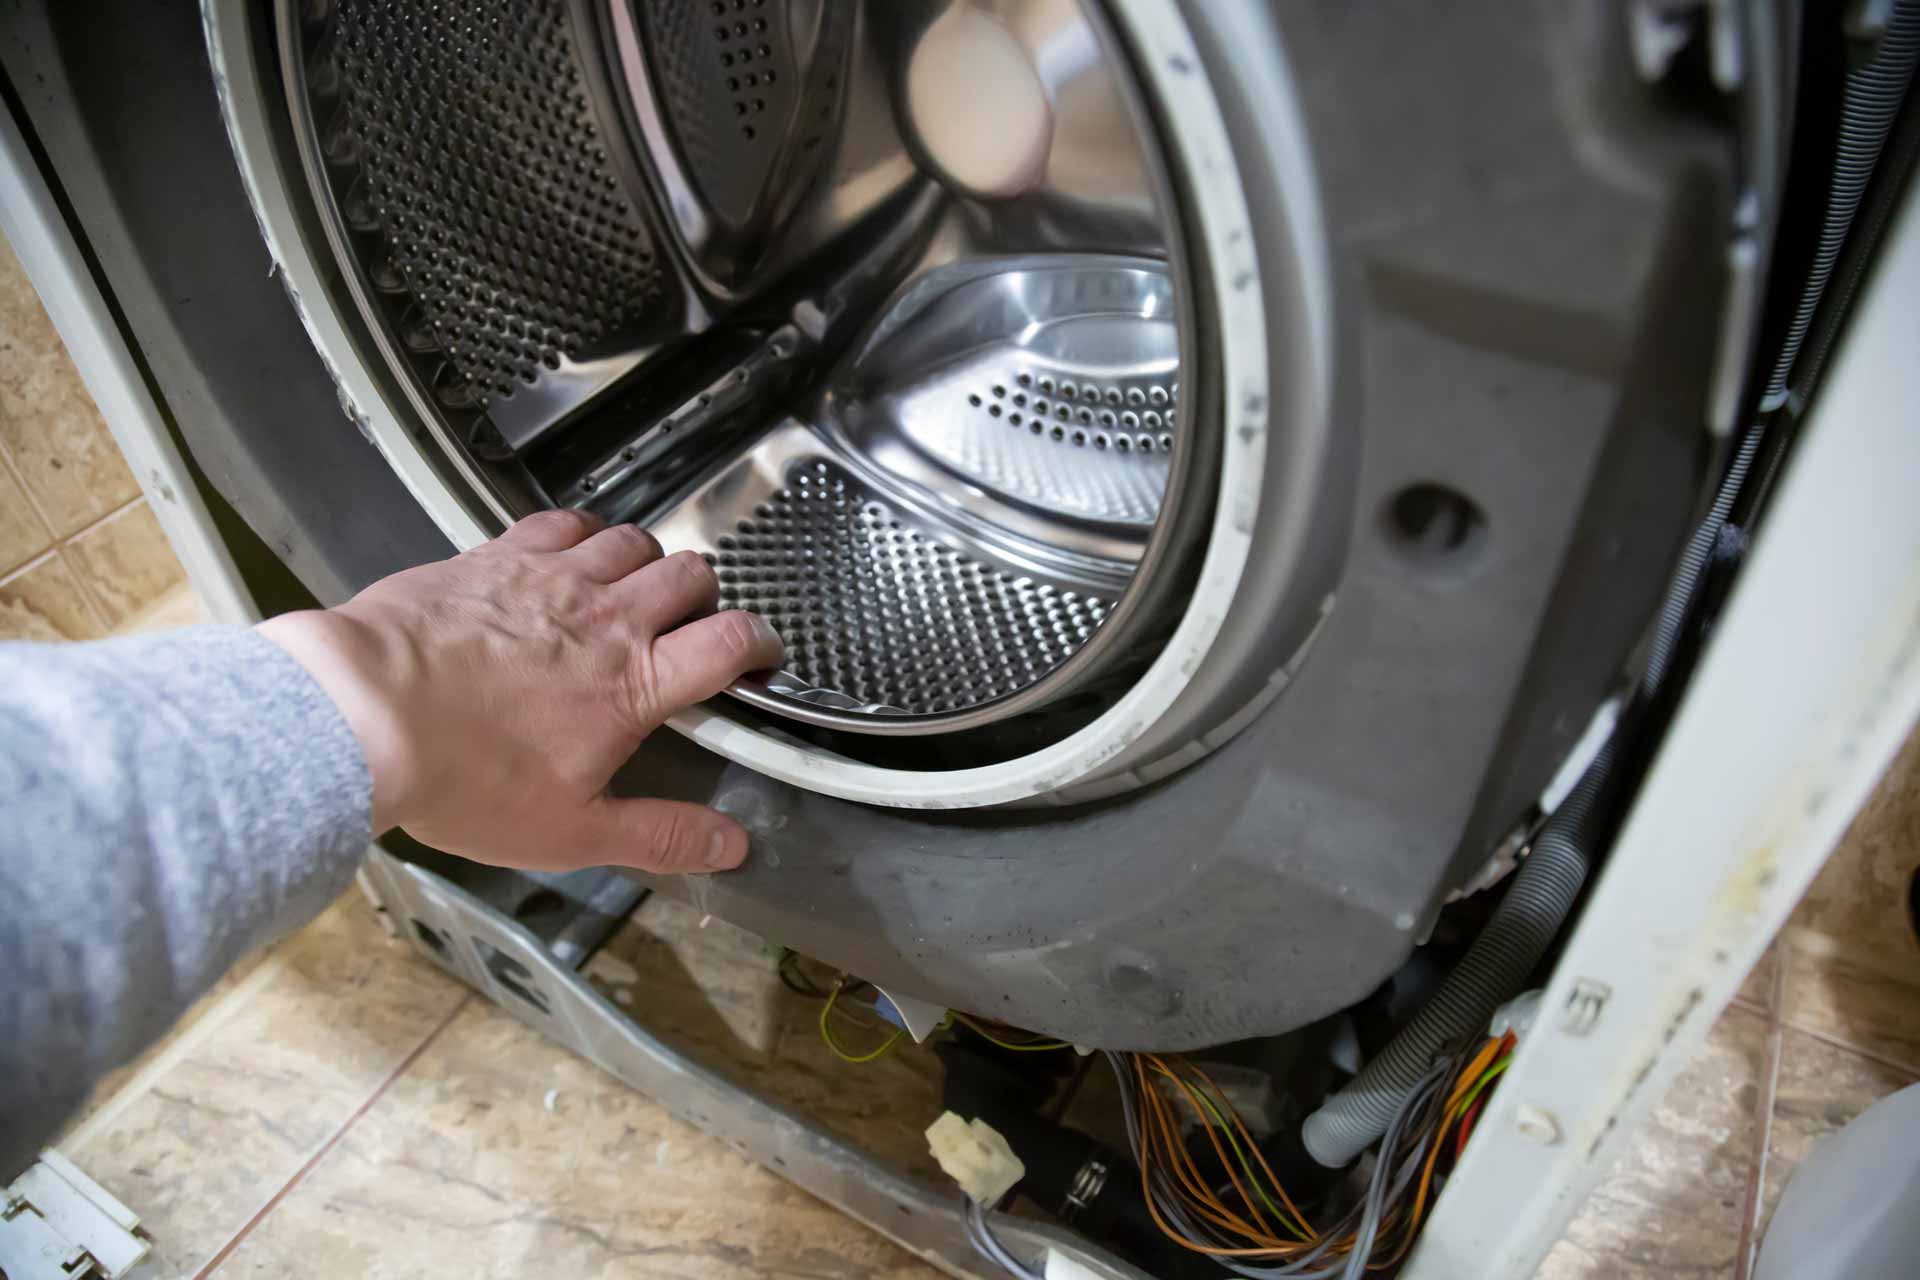 Hand reaching in to washer/dryer drum